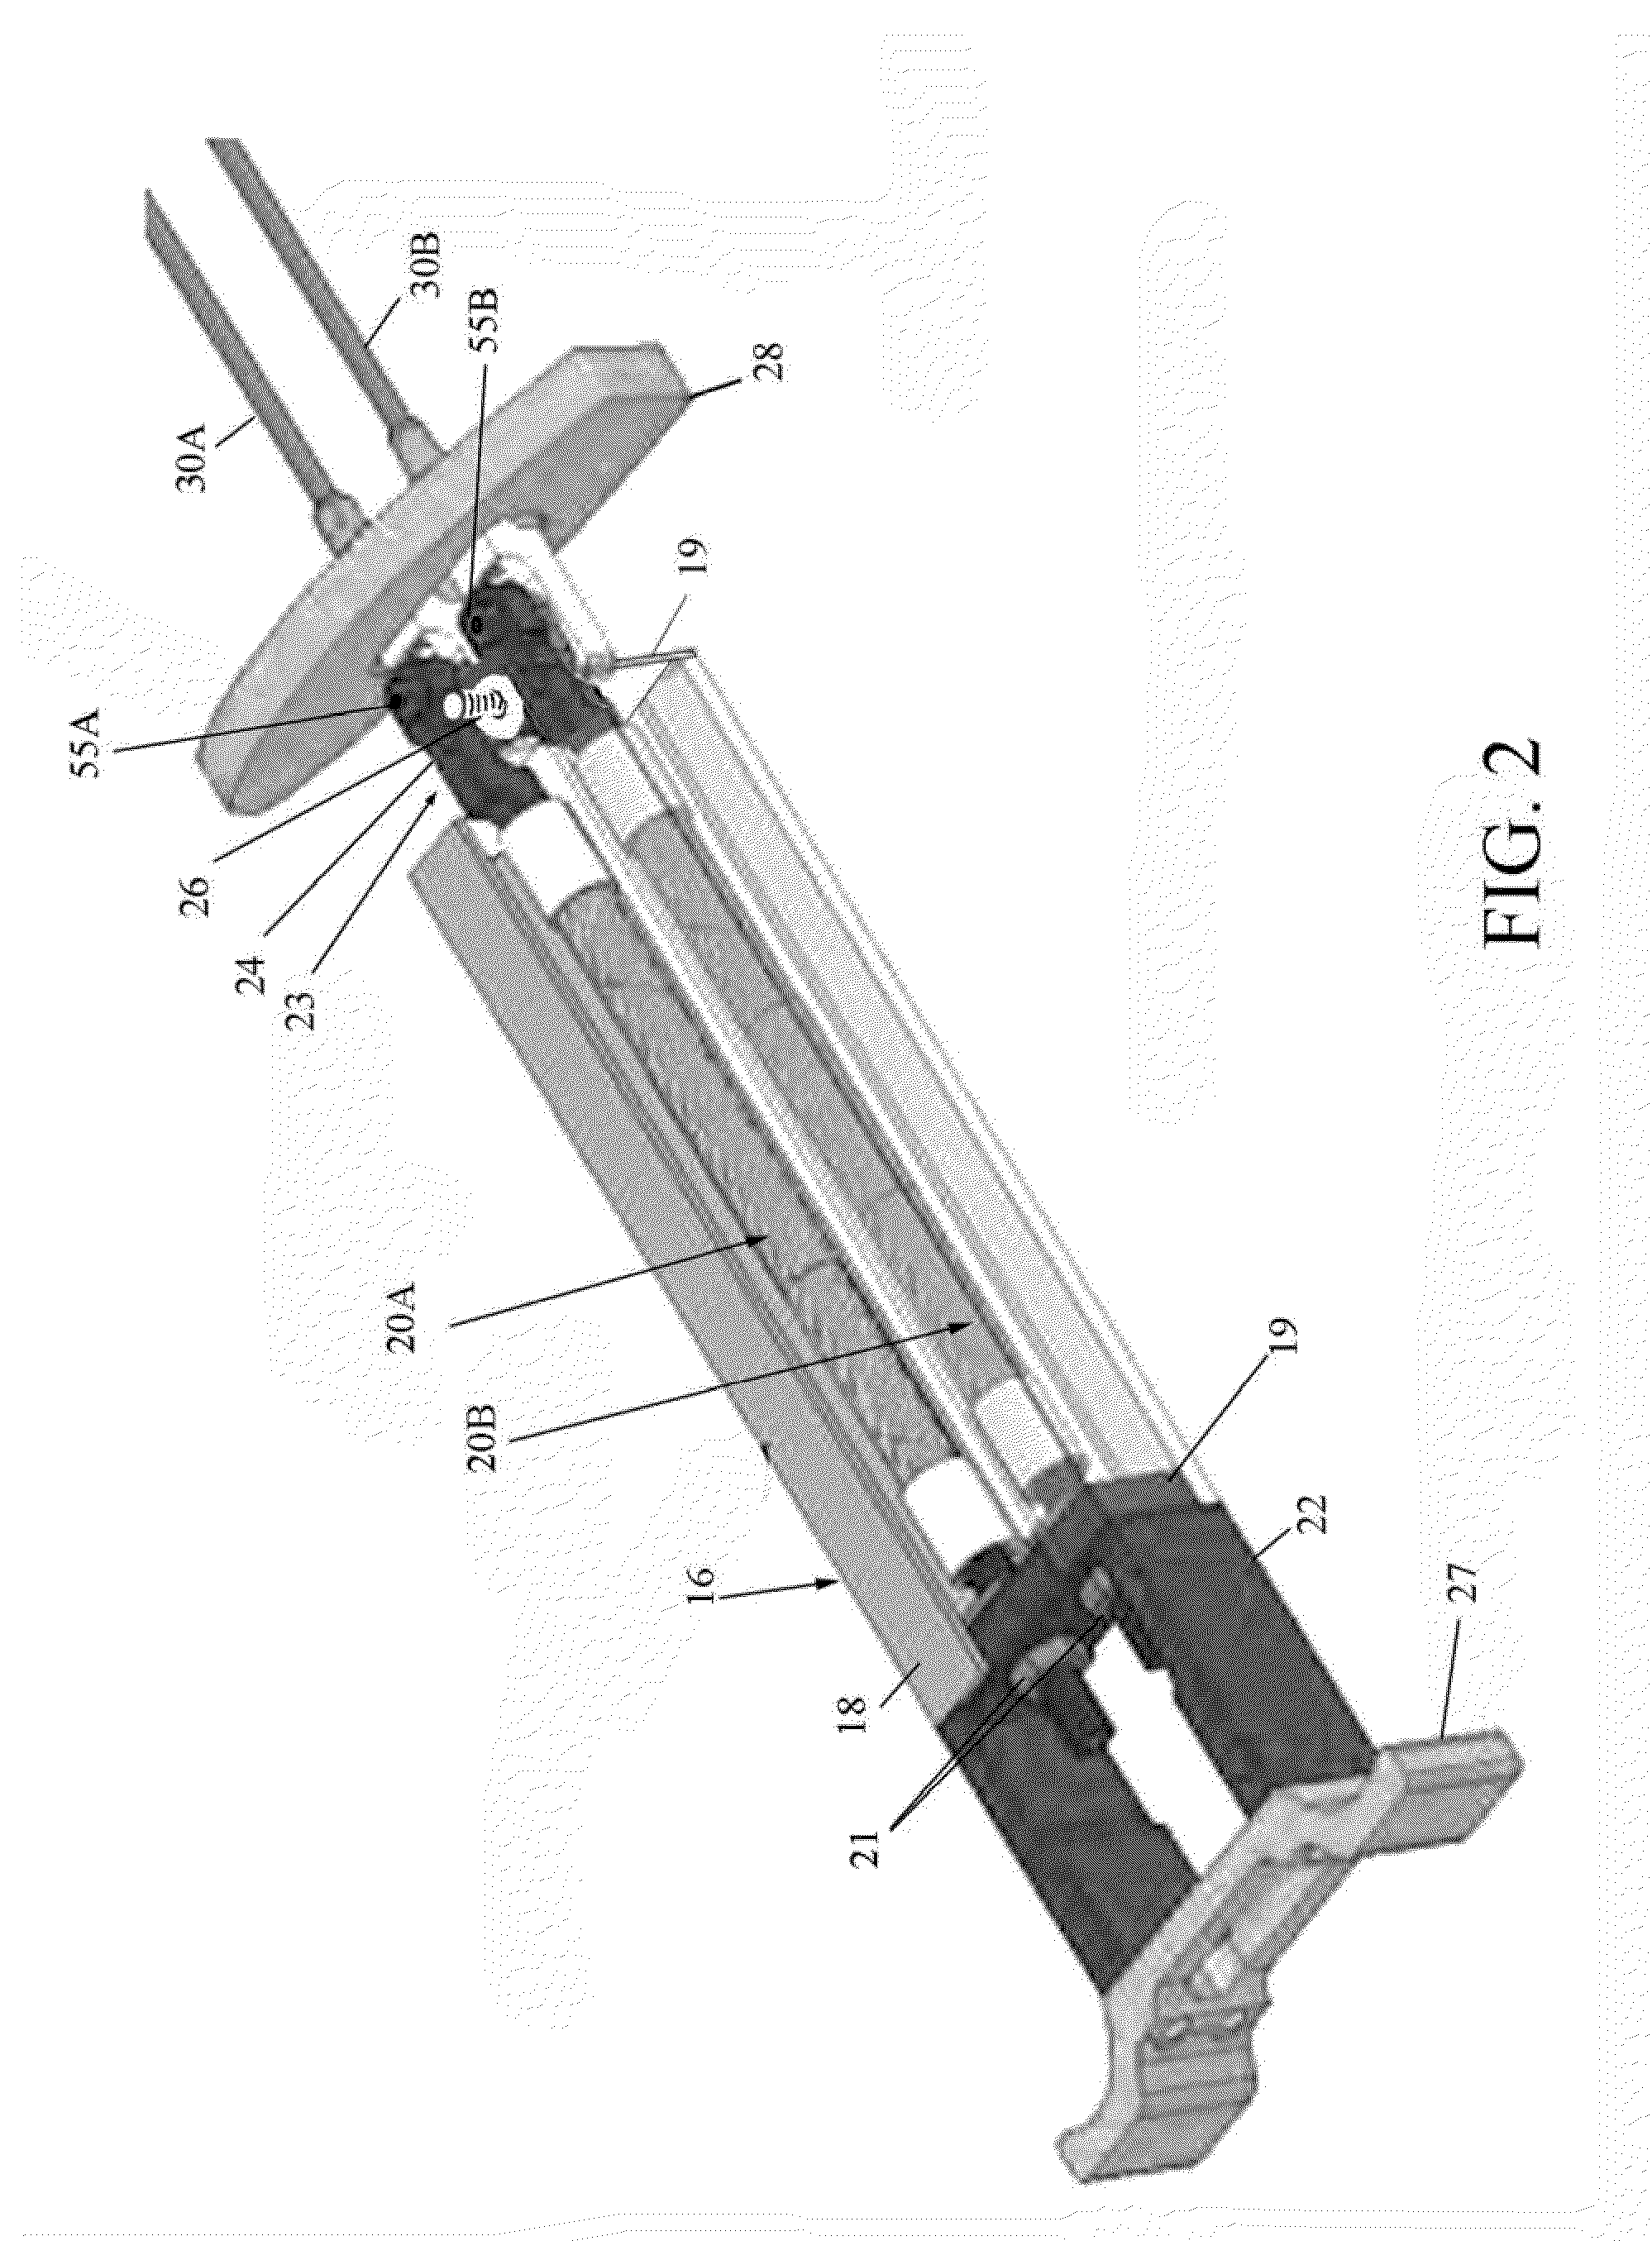 Fluidic Artificial Muscle Actuation System For Trailing-Edge Flap